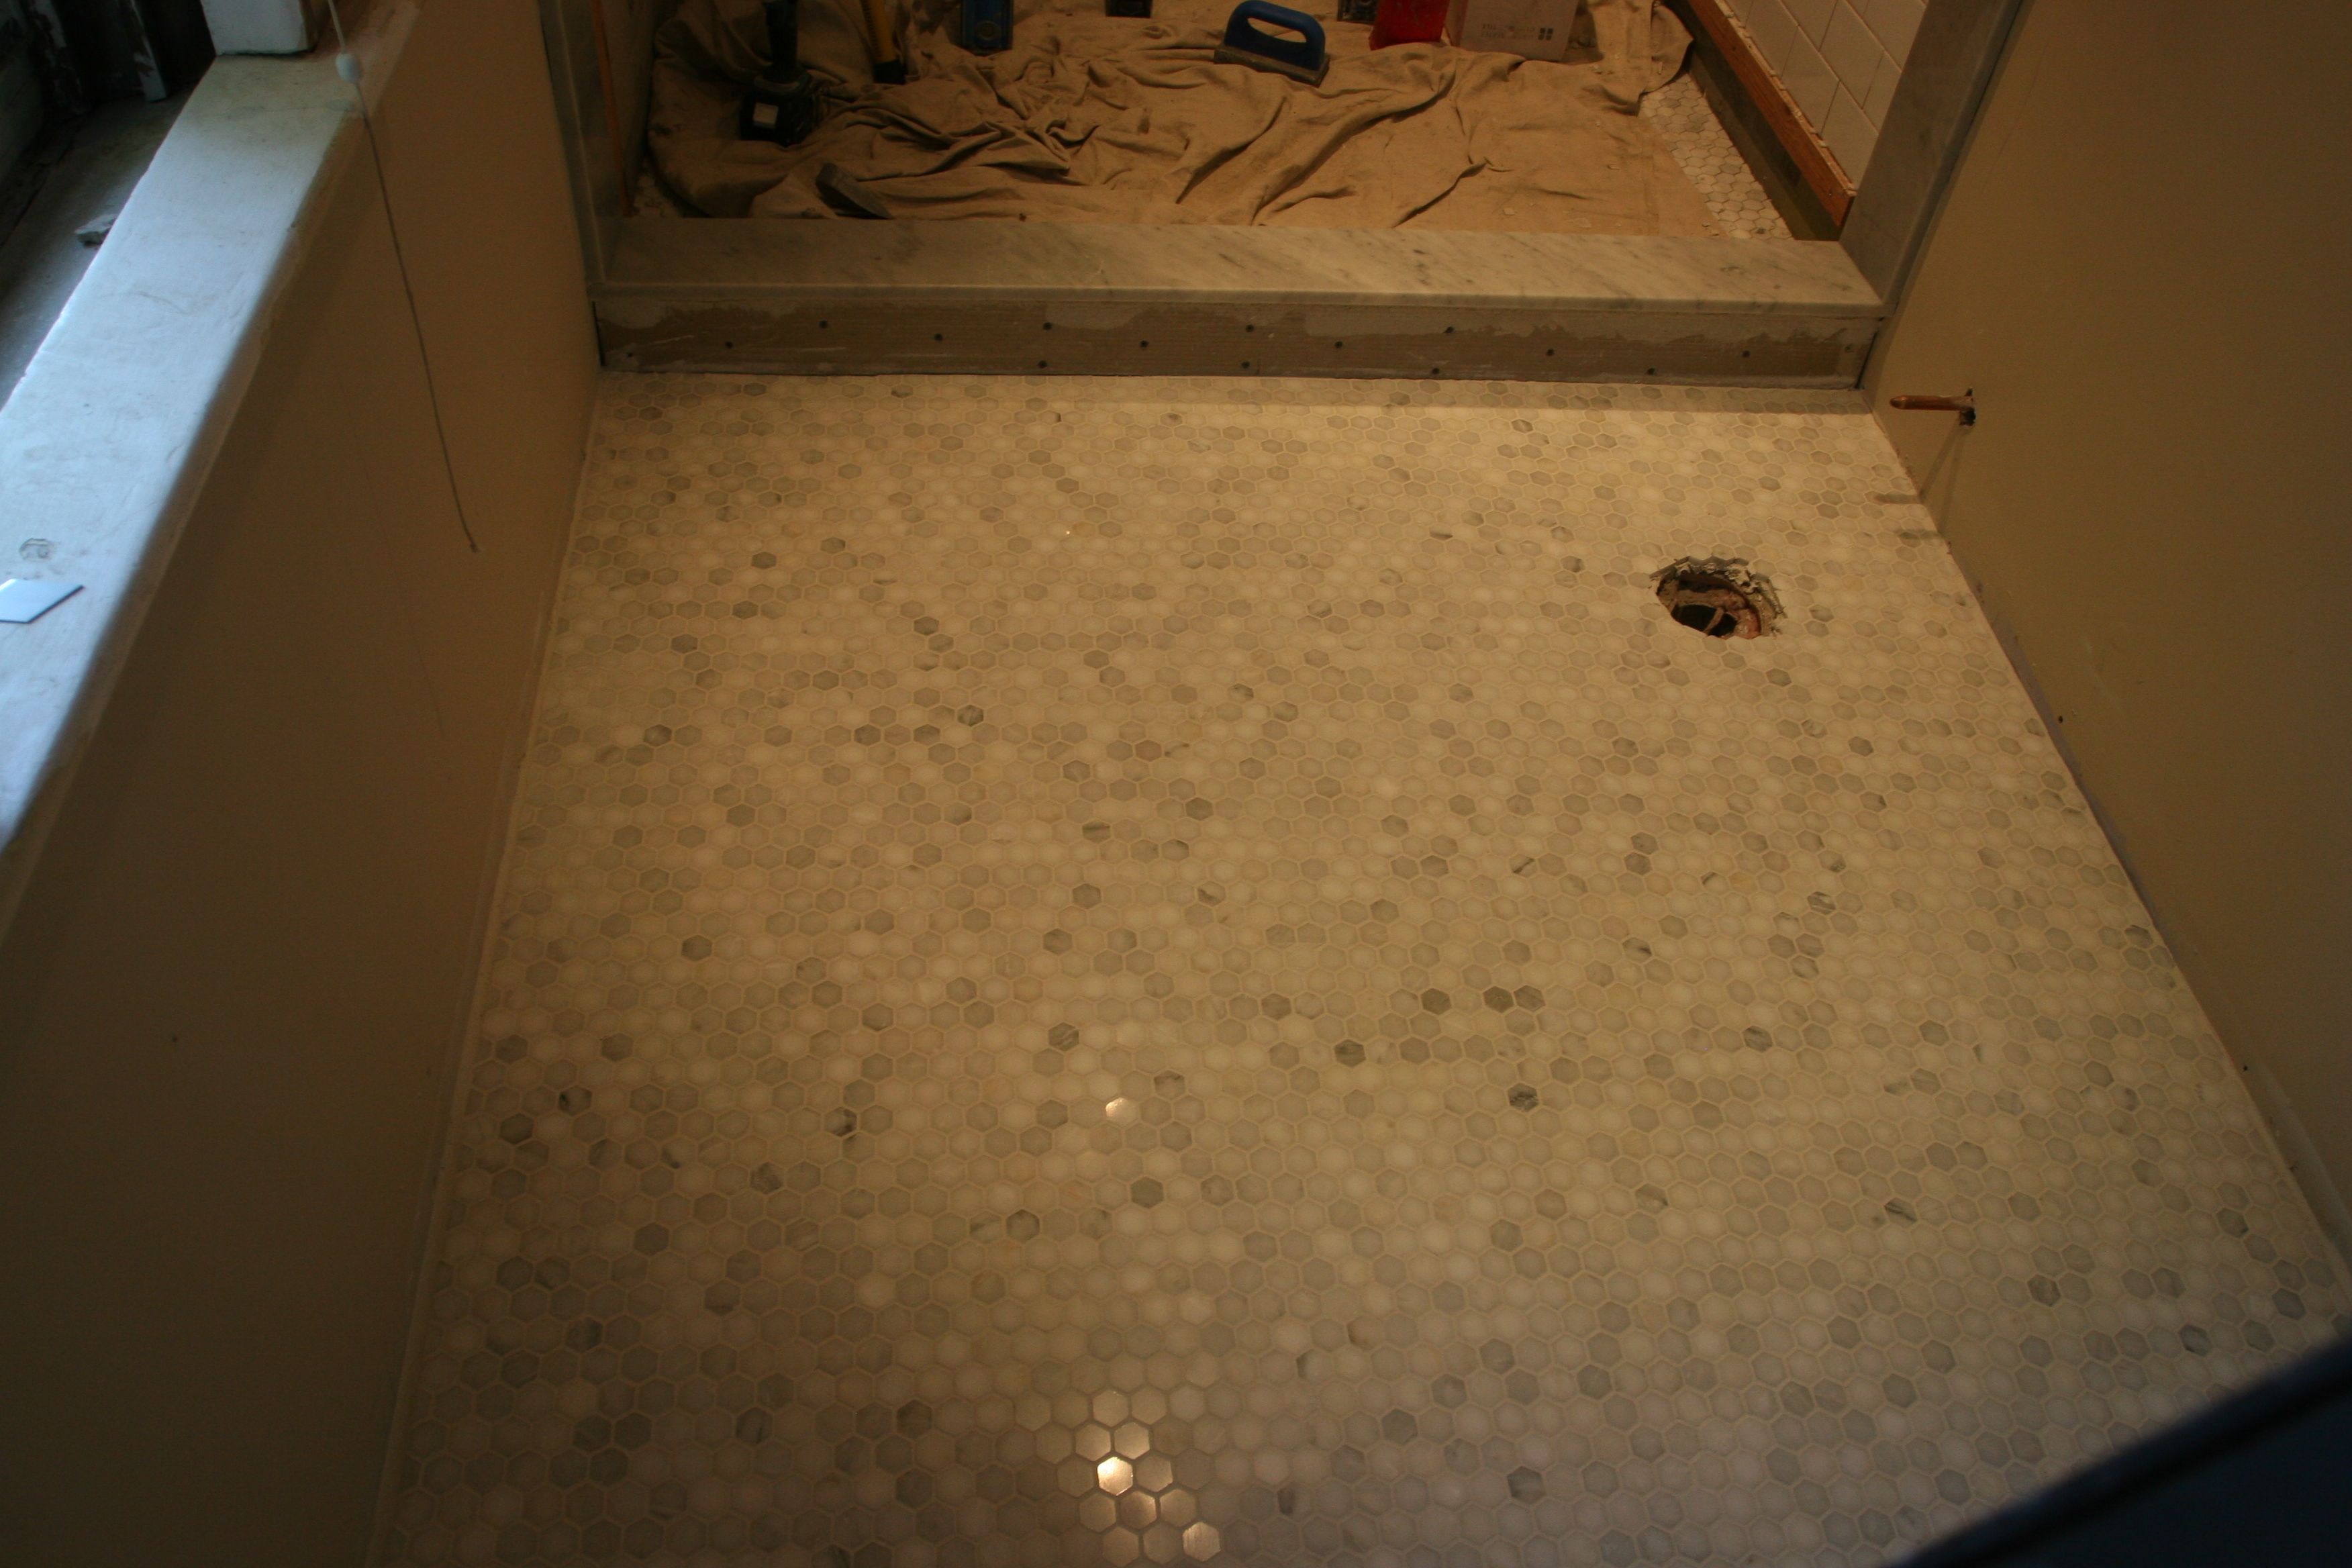 Ta-dah! Grout makes everything seem so creamy, and dreamy. I'll nap here next.